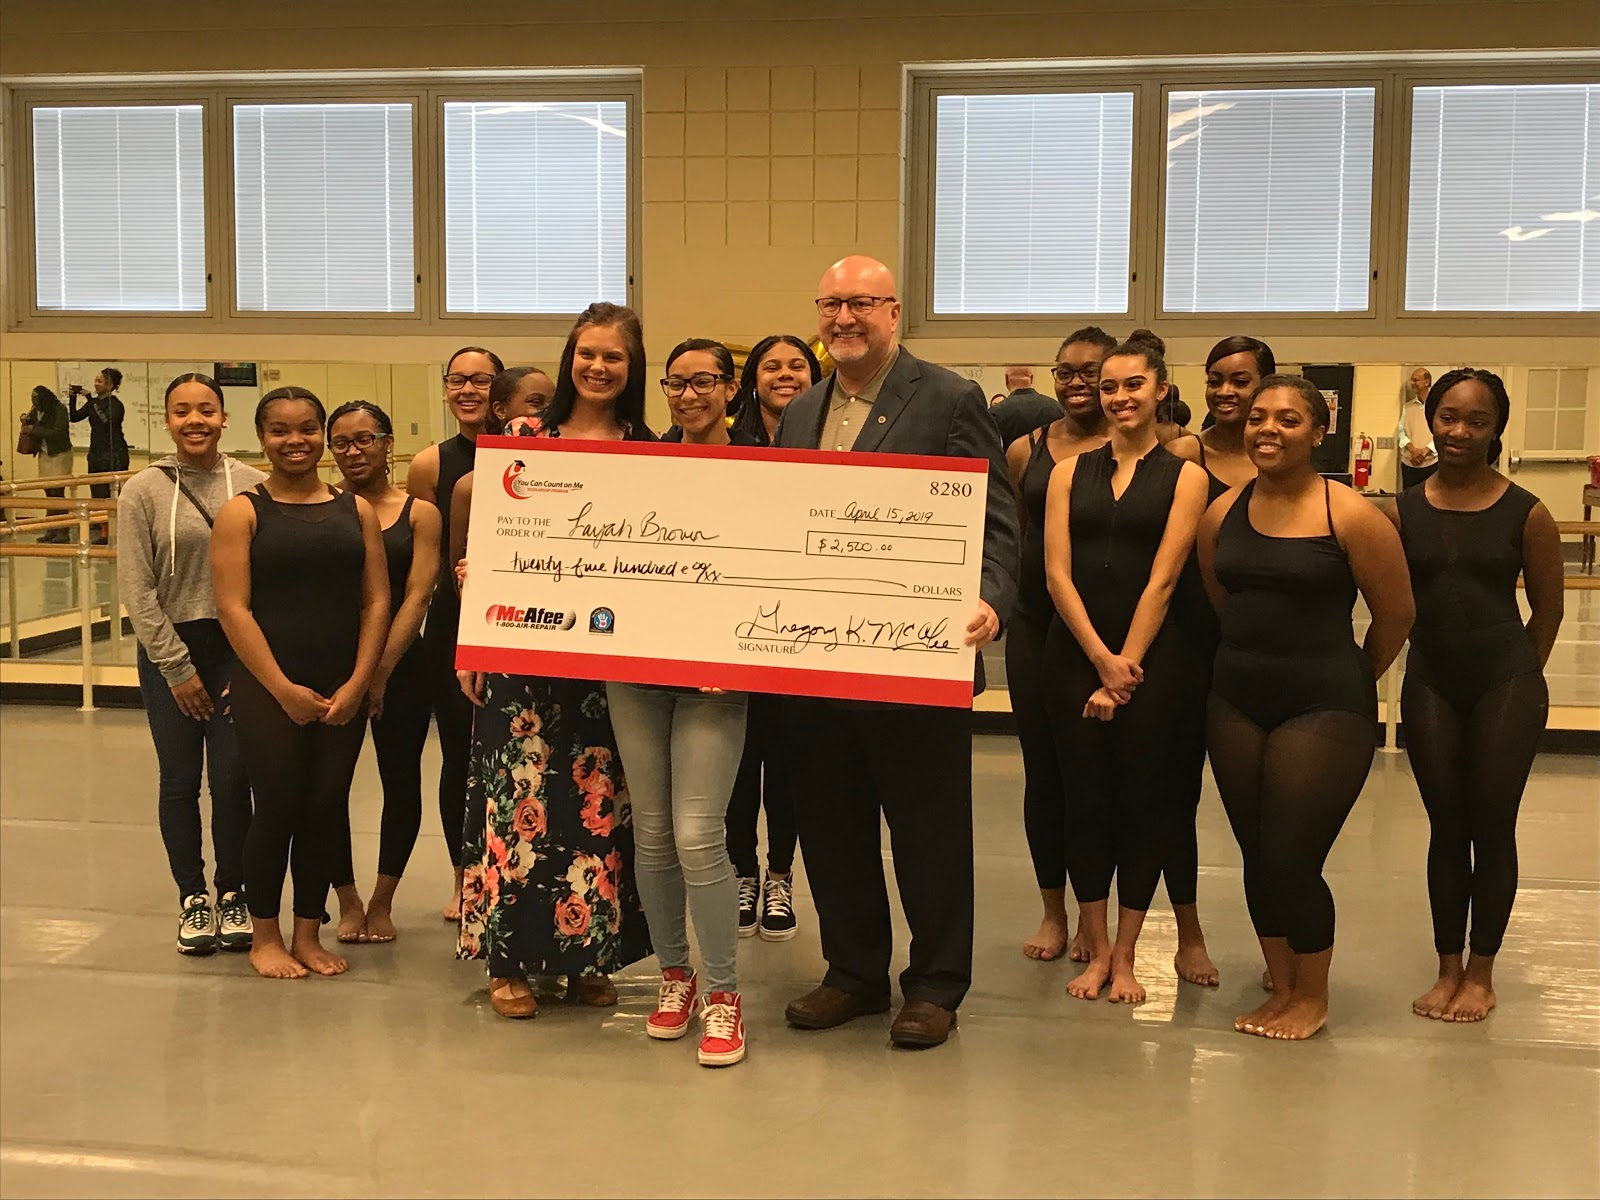 Layah Brown and her Stivers Dance class pose with Greg McAfee and scholarship check